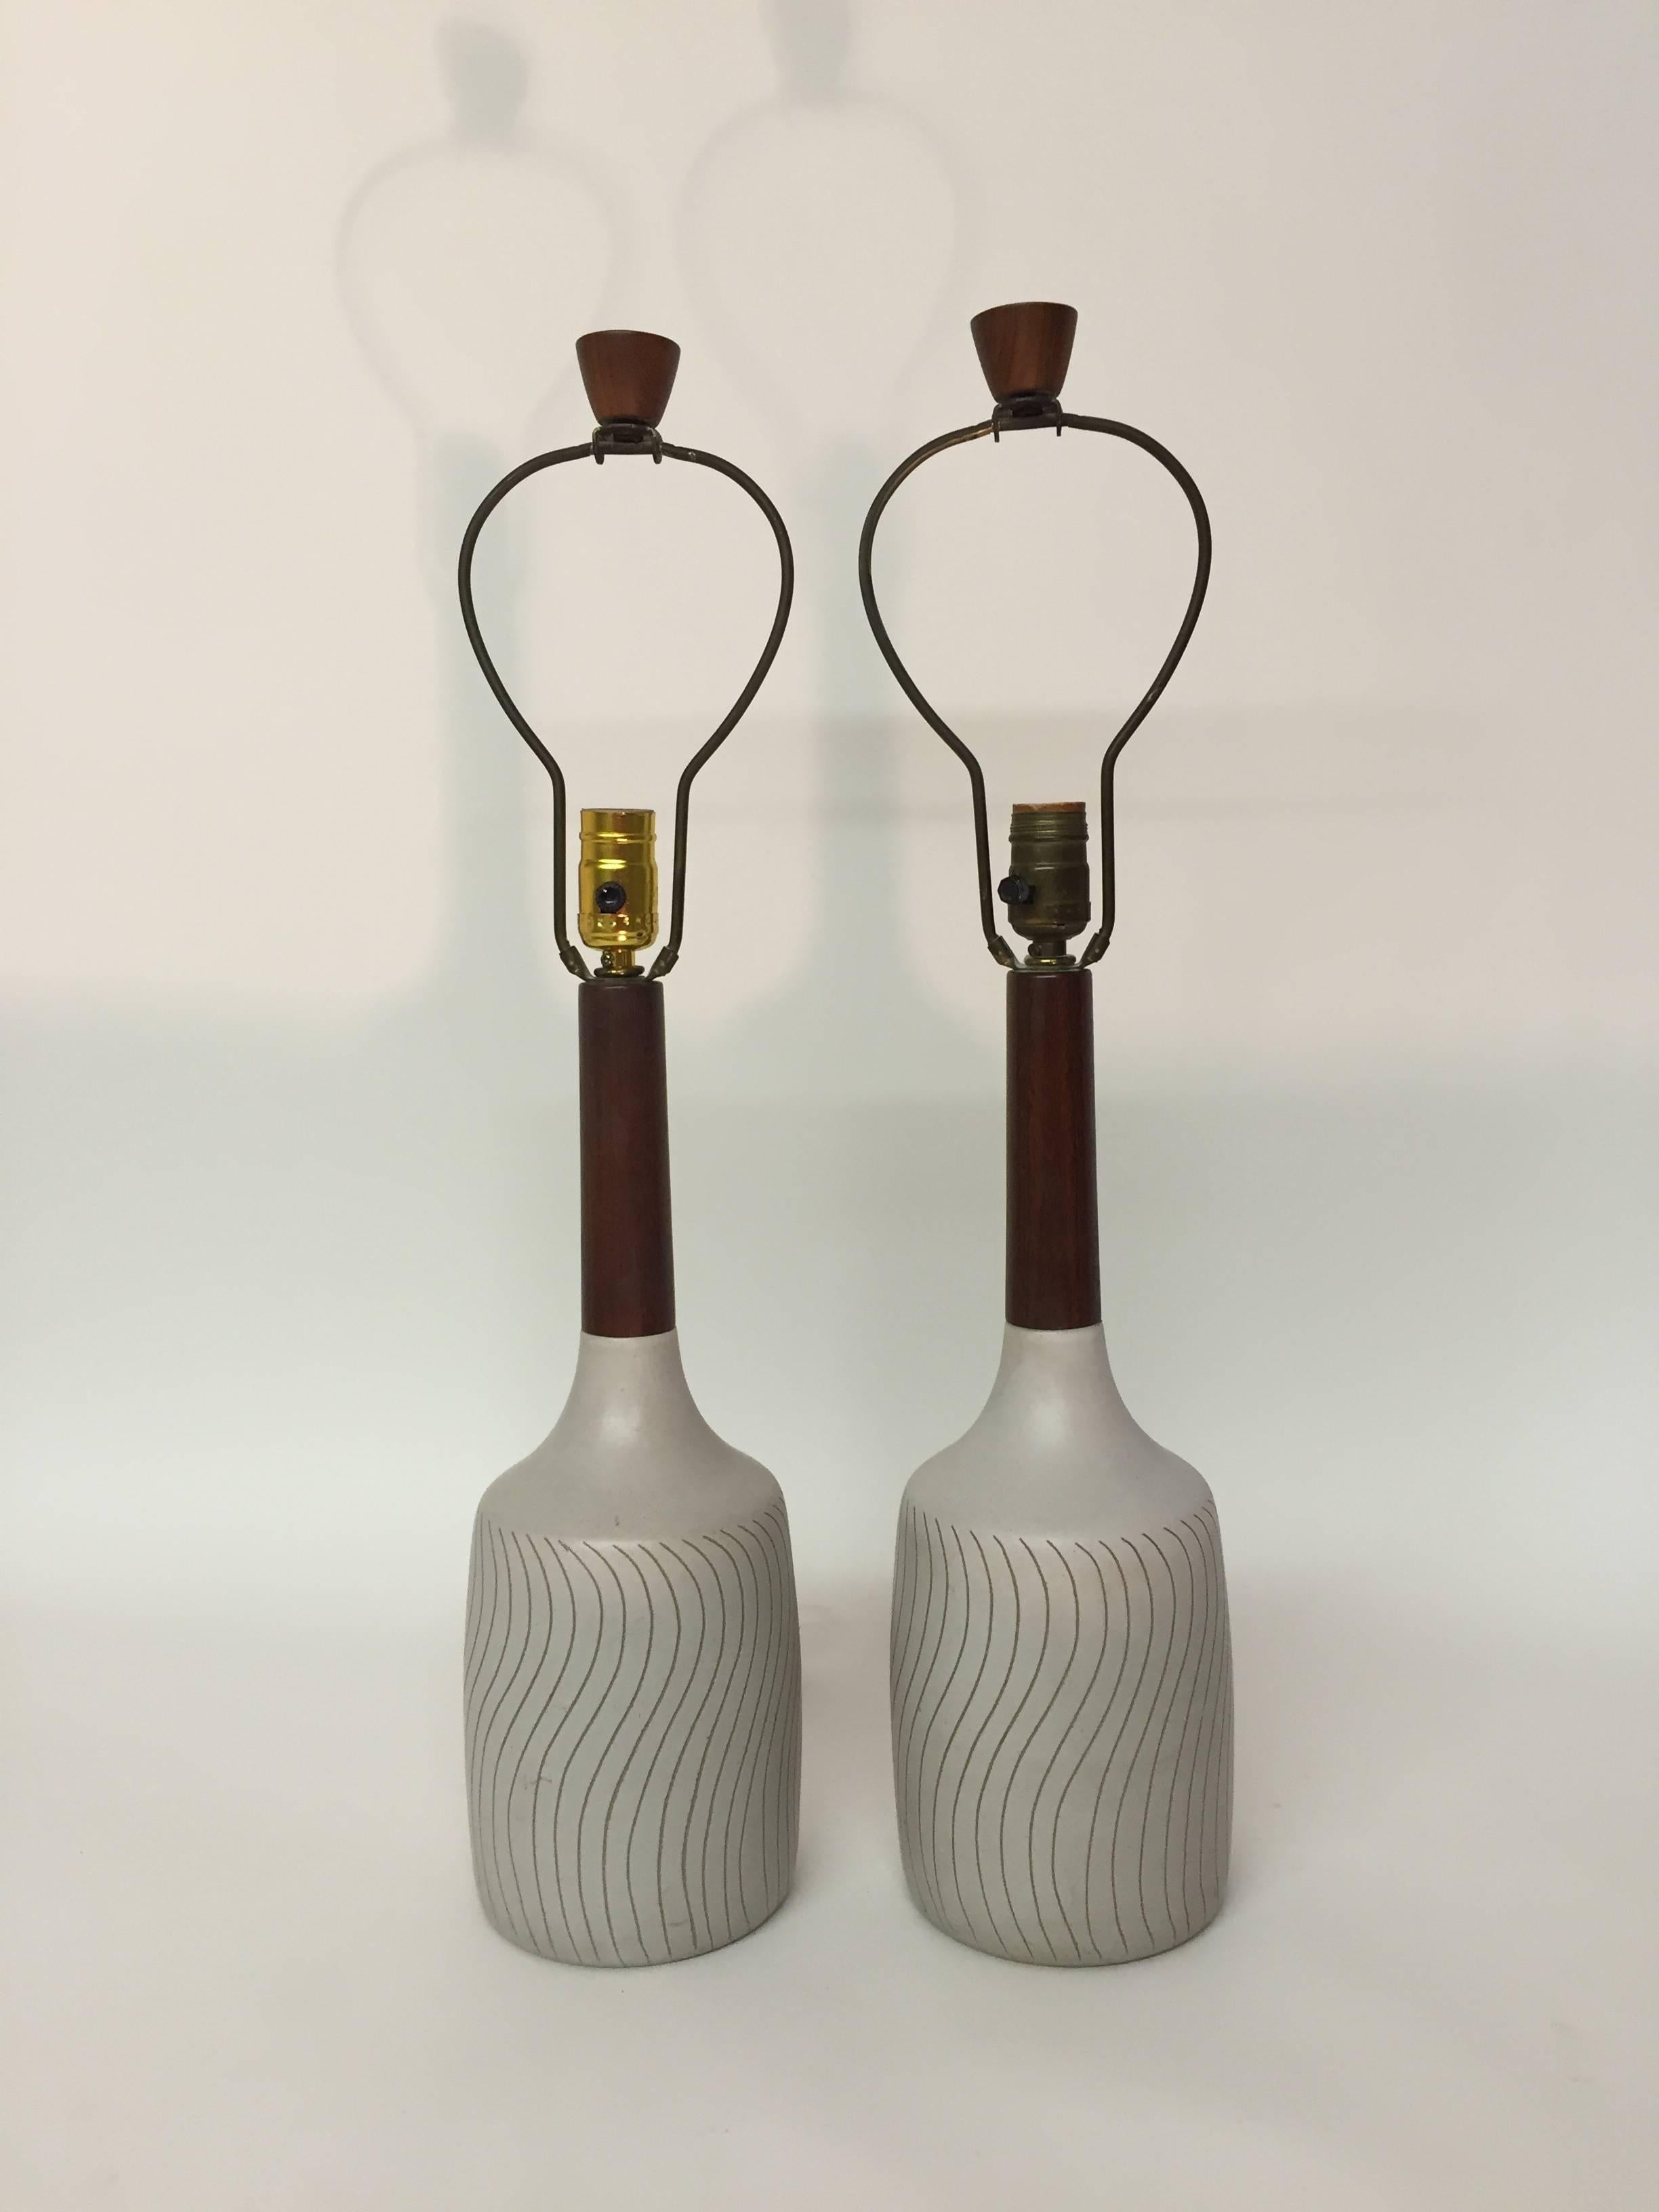 Pair of signed Martz Mid-Century Modern pottery and teak table lamps. Gordon & Jane Martz design. Decorated in a matte glaze with incised wave pattern. Overall height is 26.5" high. Original teak finials and shaft. Pottery measures